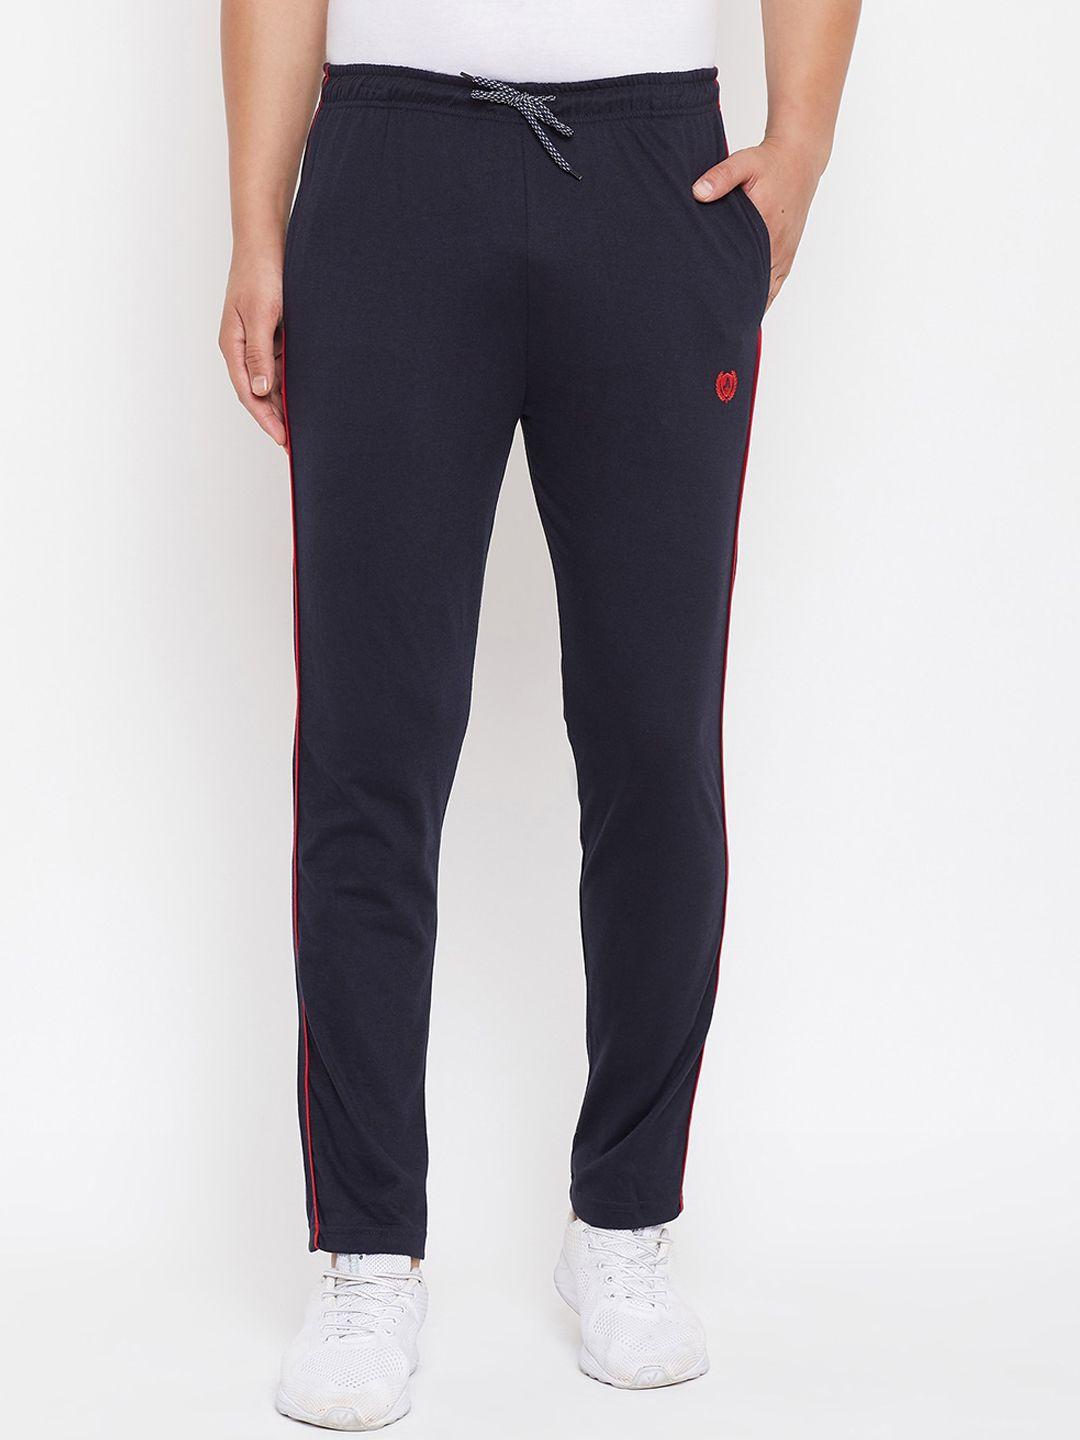 adobe-men-navy-blue-solid-straight-fit-track-pants